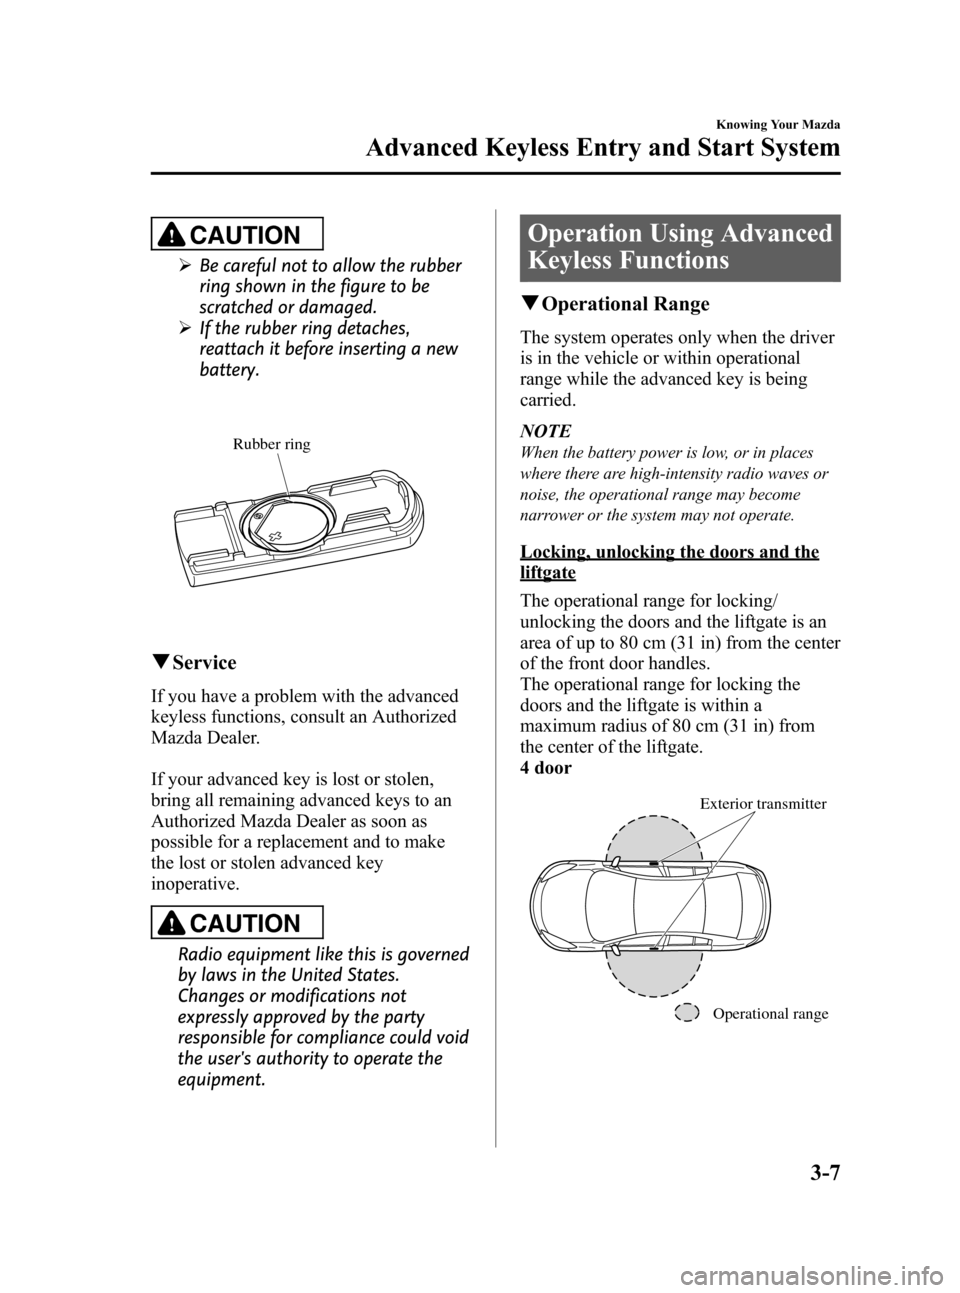 MAZDA MODEL 3 HATCHBACK 2011  Owners Manual (in English) Black plate (83,1)
CAUTION
ØBe careful not to allow the rubber
ring shown in the figure to be
scratched or damaged.
Ø If the rubber ring detaches,
reattach it before inserting a new
battery.
Rubber 